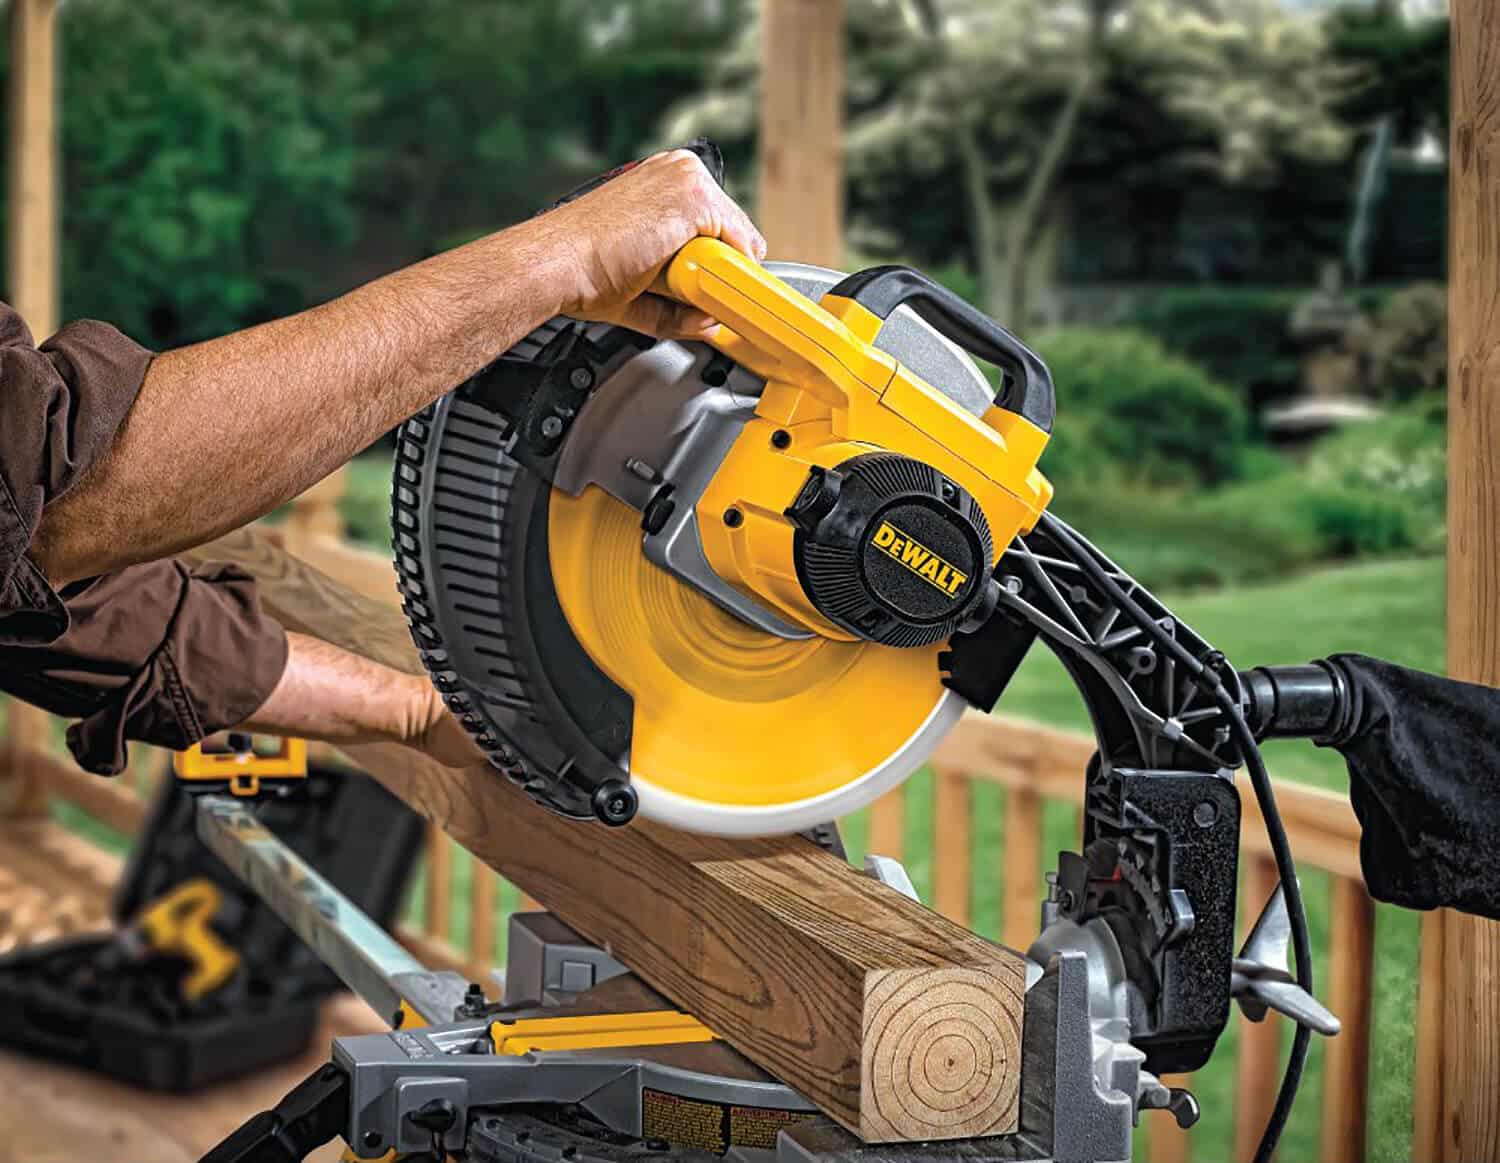 What Is The Difference Between A Compound And Sliding Miter Saw - The Compound Miter Saw